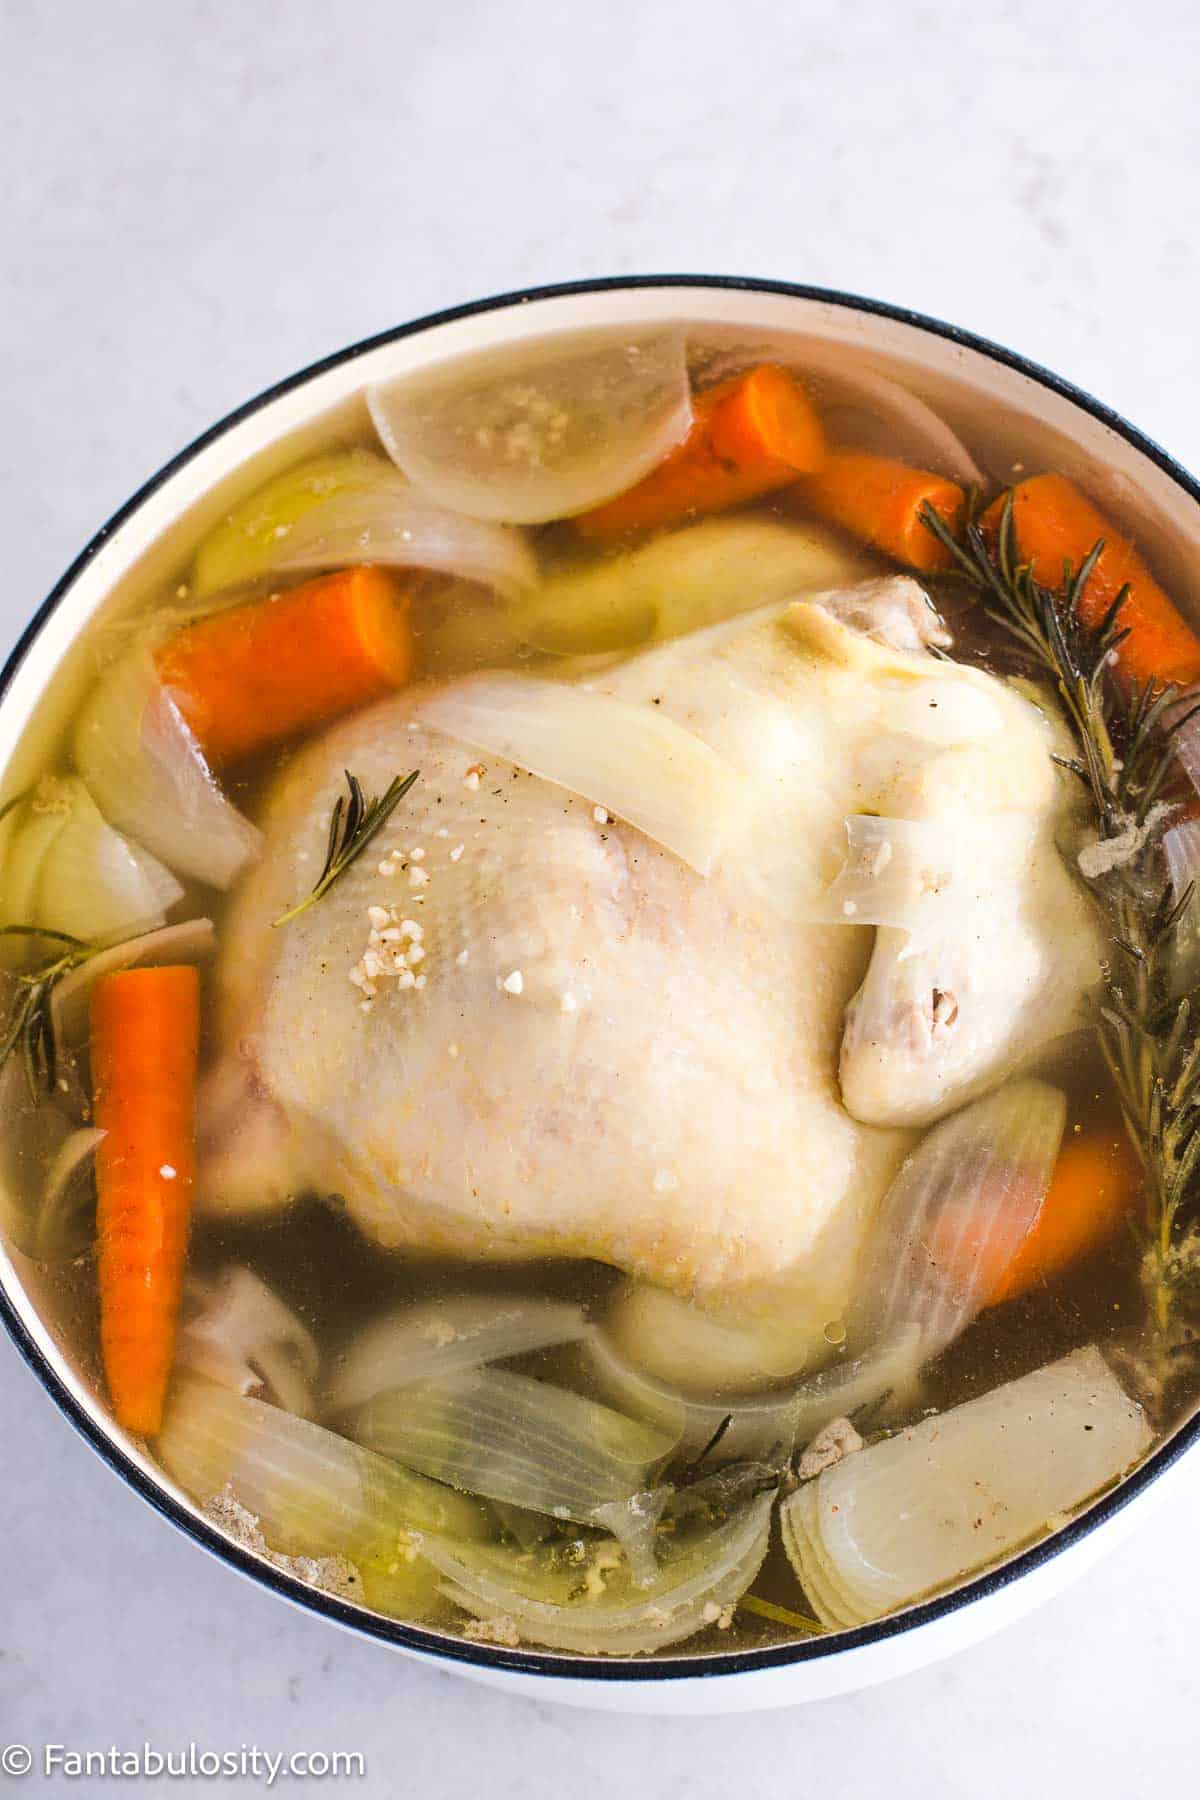 Raw, whole chicken in dutch oven, with water, vegetables and seasonings.